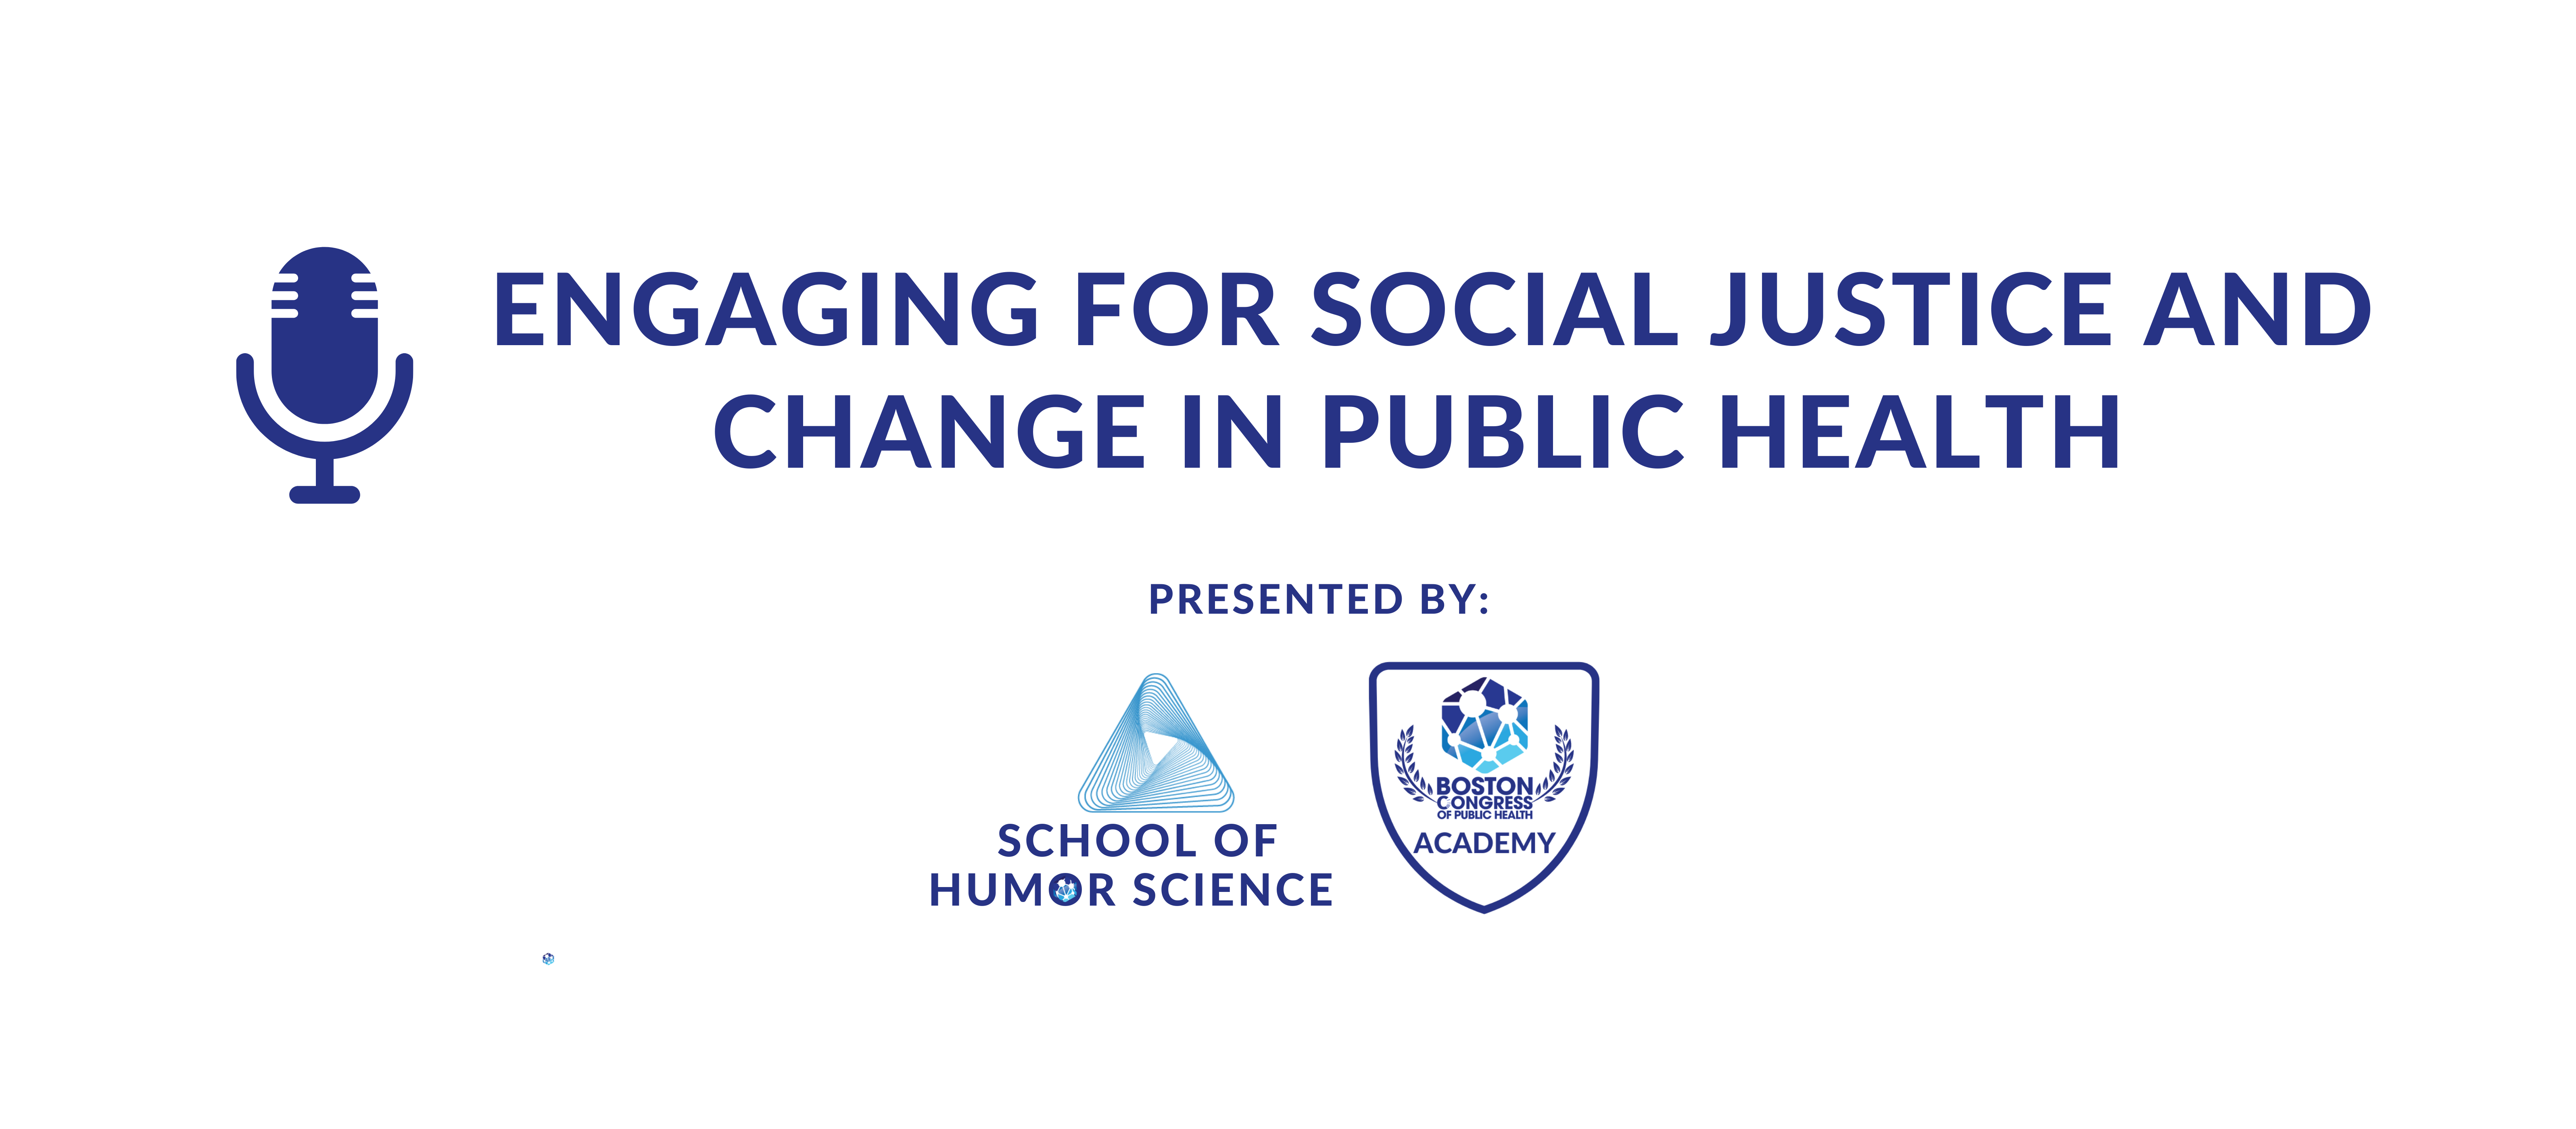 Humor Science: Communication in Public Health for Social Justice and Change